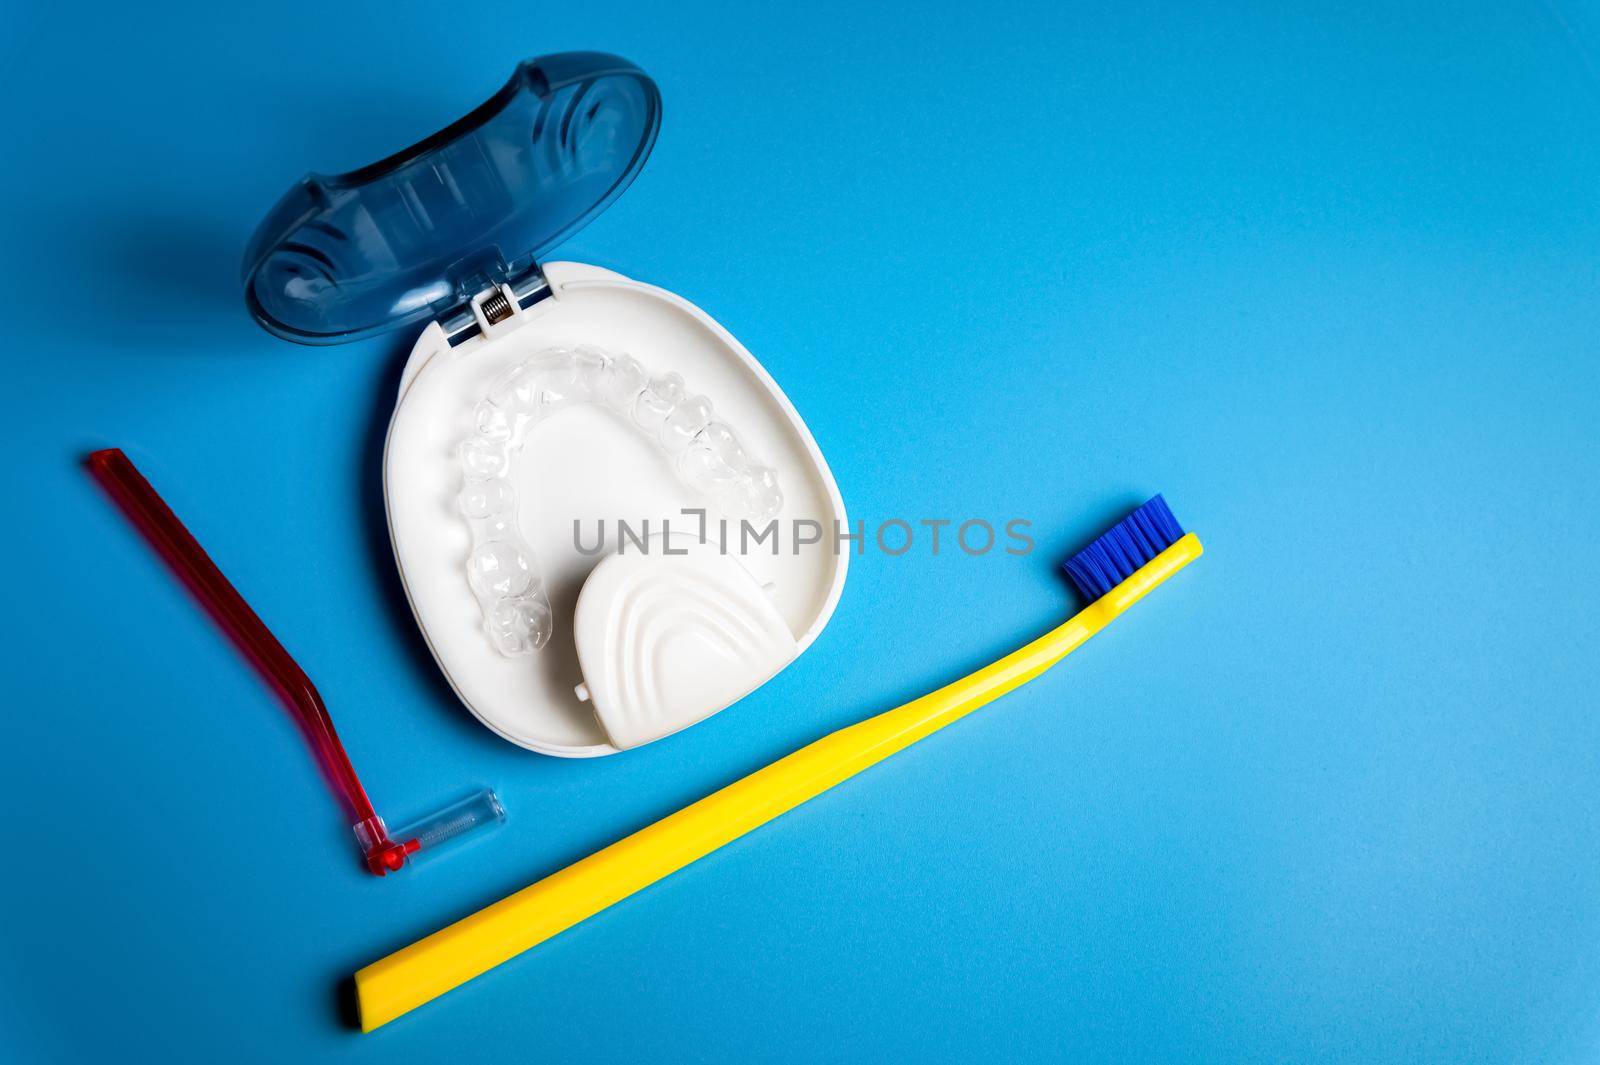 Invisible dental braces for teeth, transparent teeth aligners, plastic braces, retainers for straightening teeth, toothbrush and interdental brush on blue background, top view.